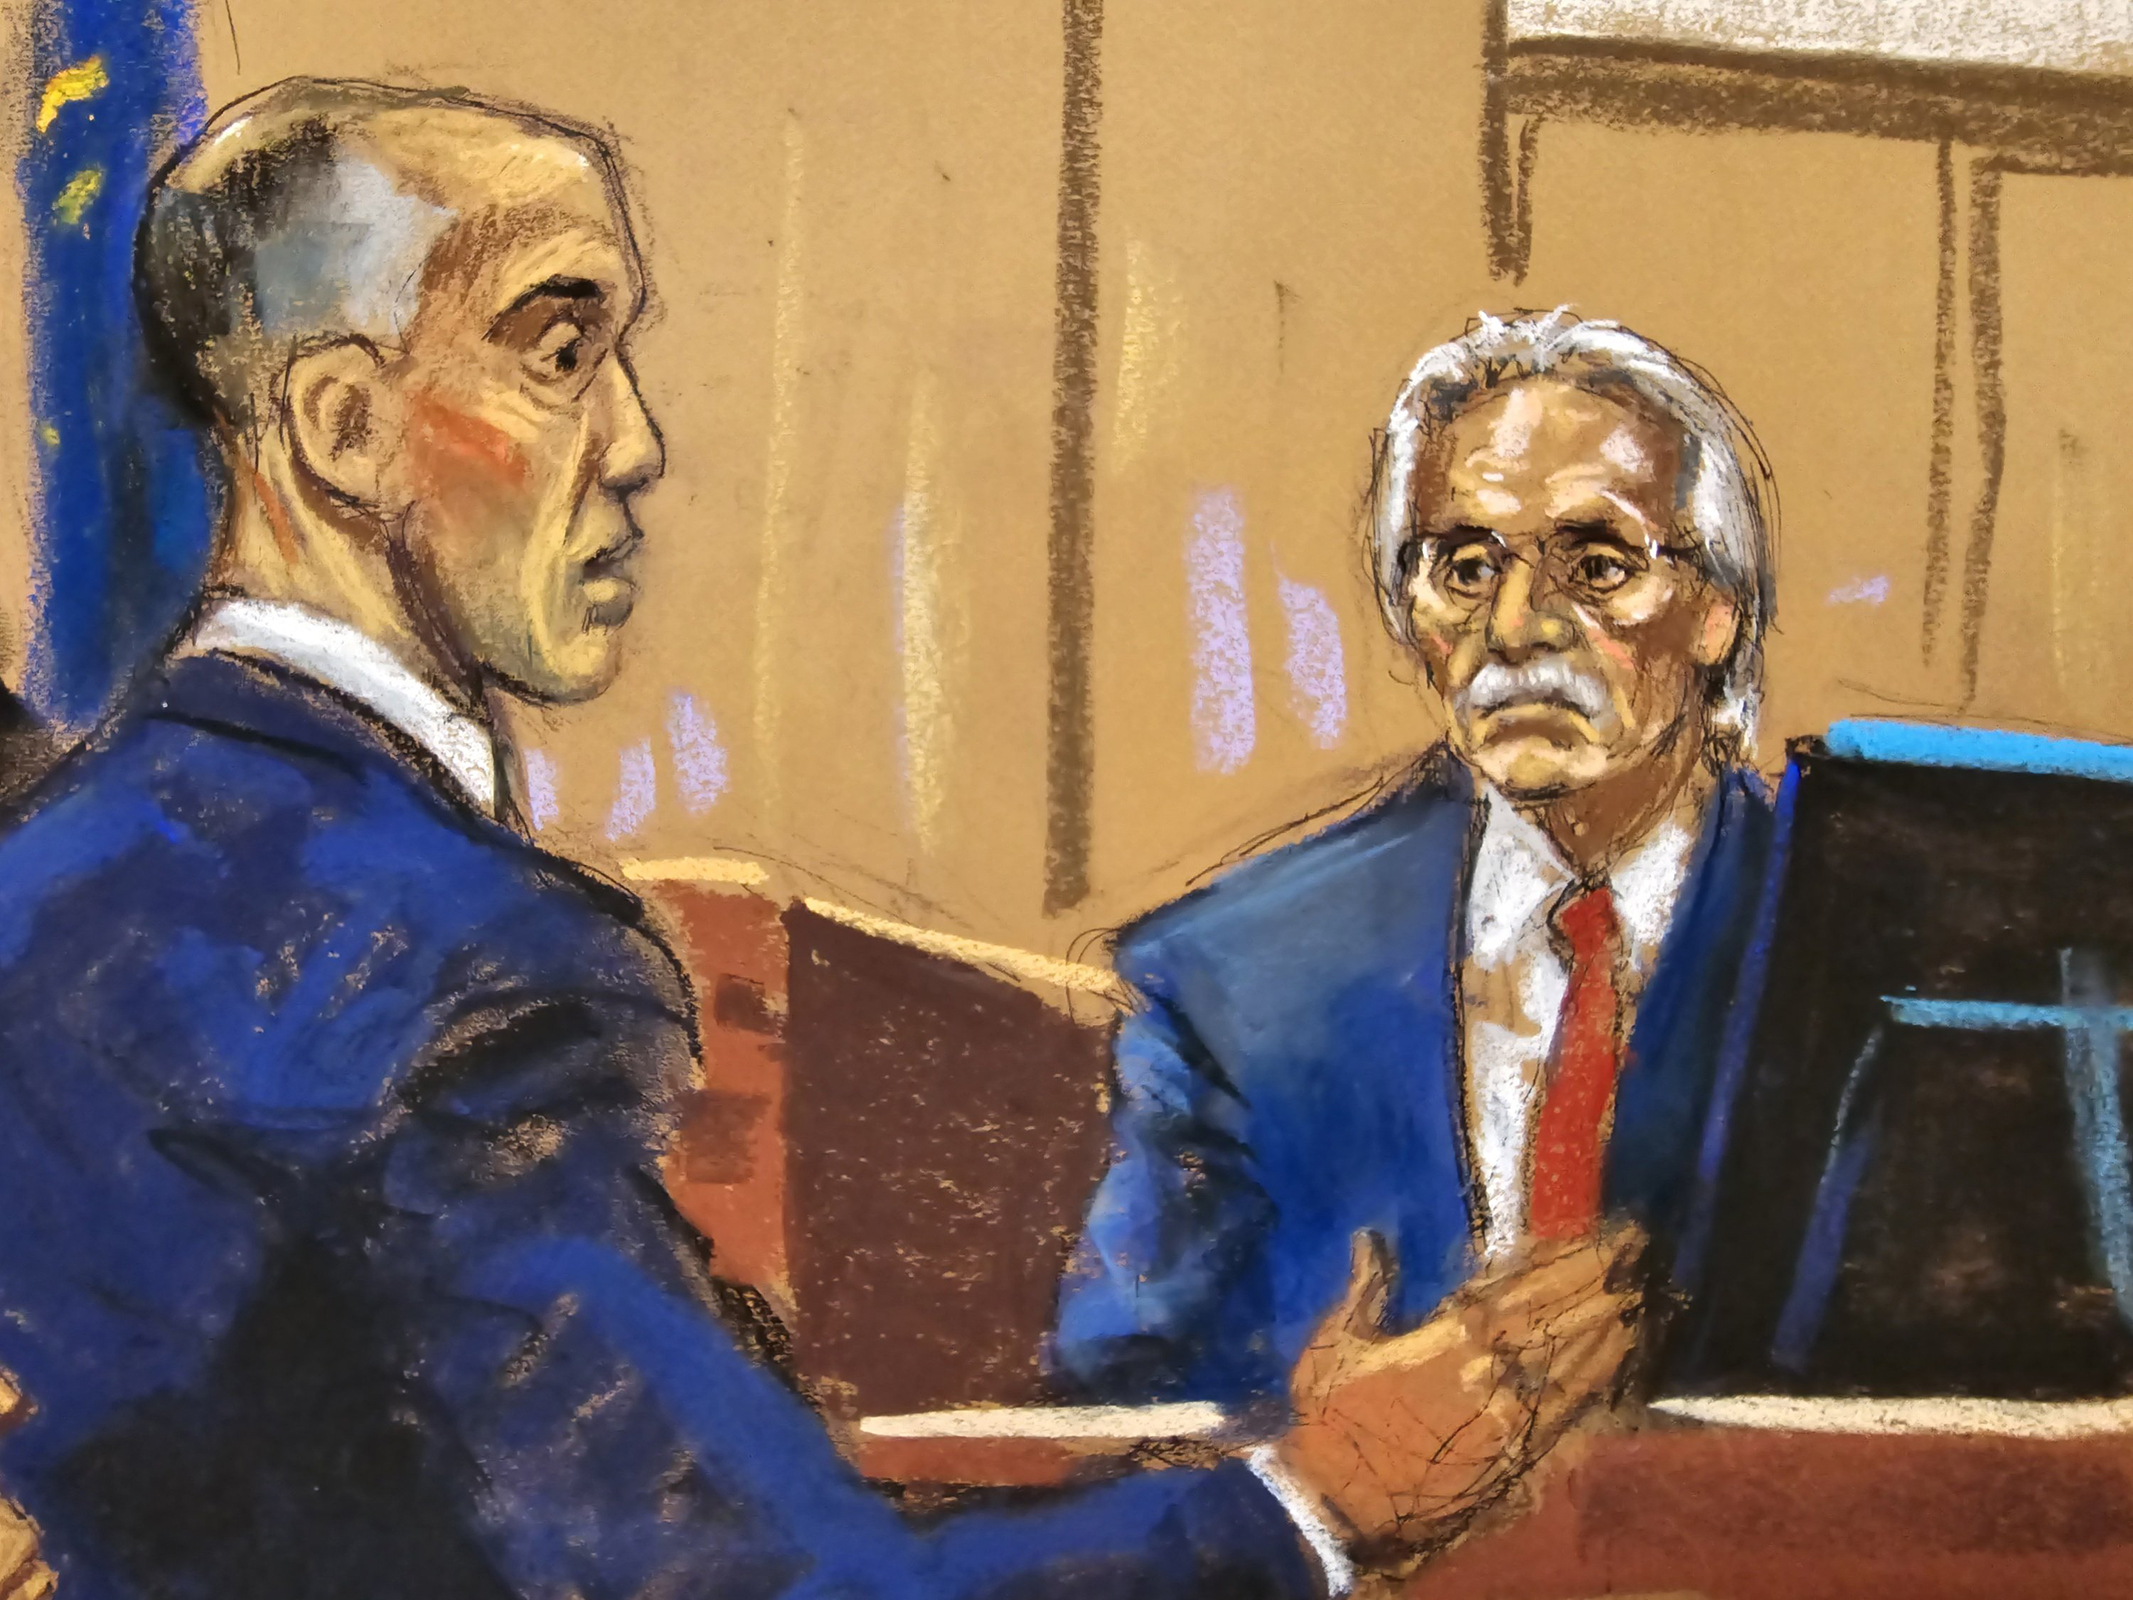 Emil Bove questions David Pecker during the trial on Friday.